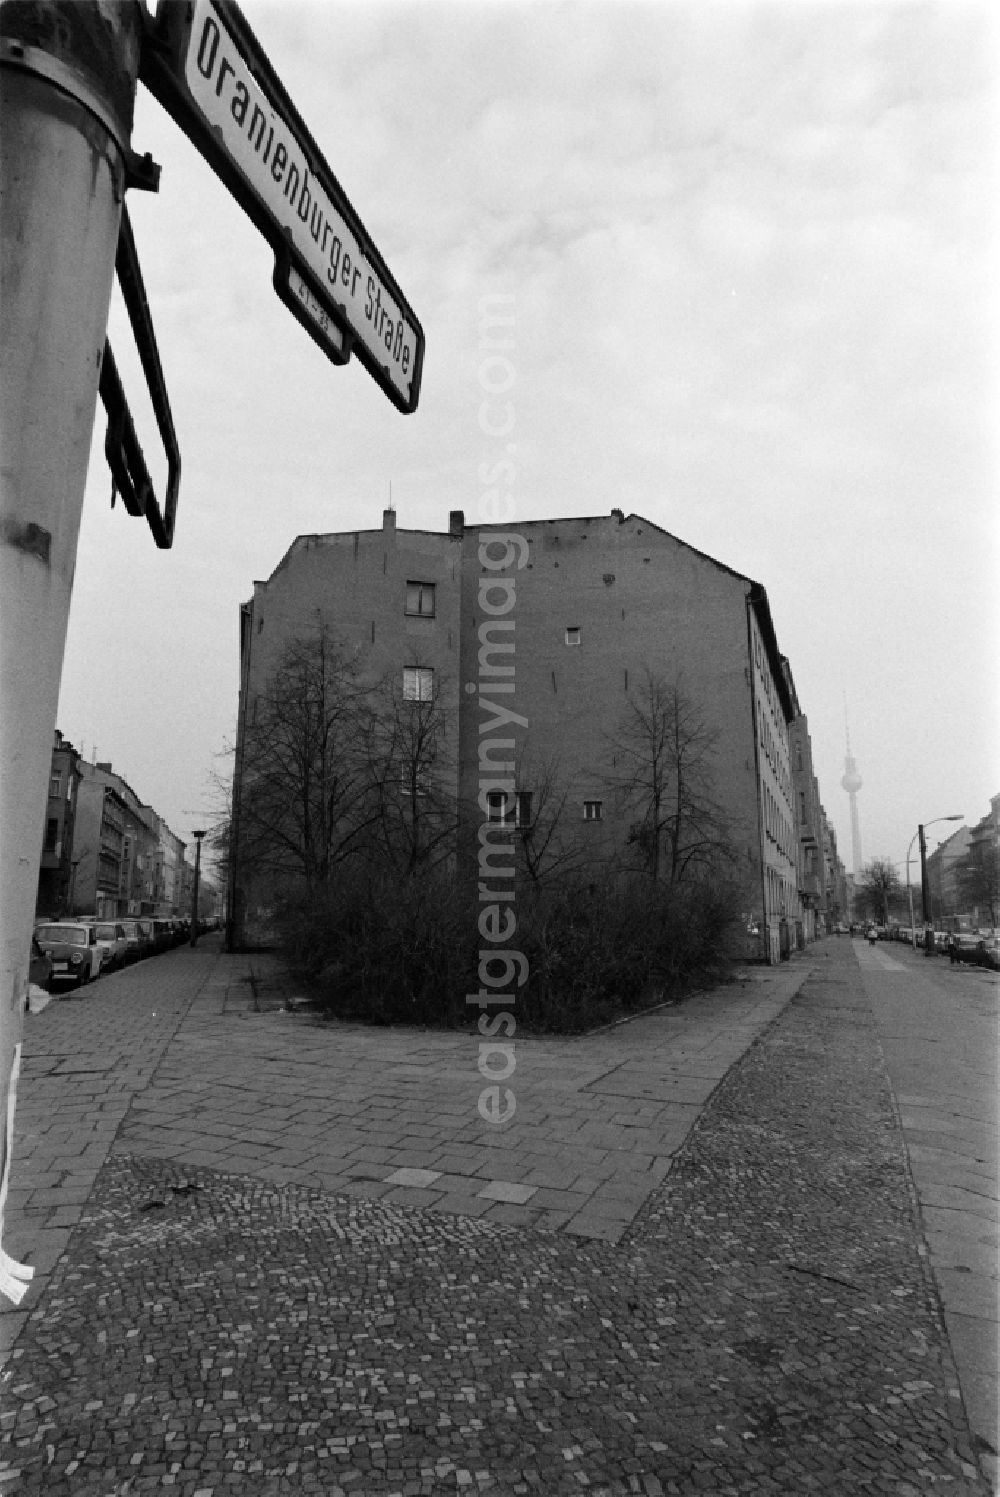 GDR photo archive: Berlin - Oranienburger Strasse on the corner Auguststrasse with view towards the city center on the TV tower in Berlin - Mitte, the former capital of the GDR, German Democratic Republic